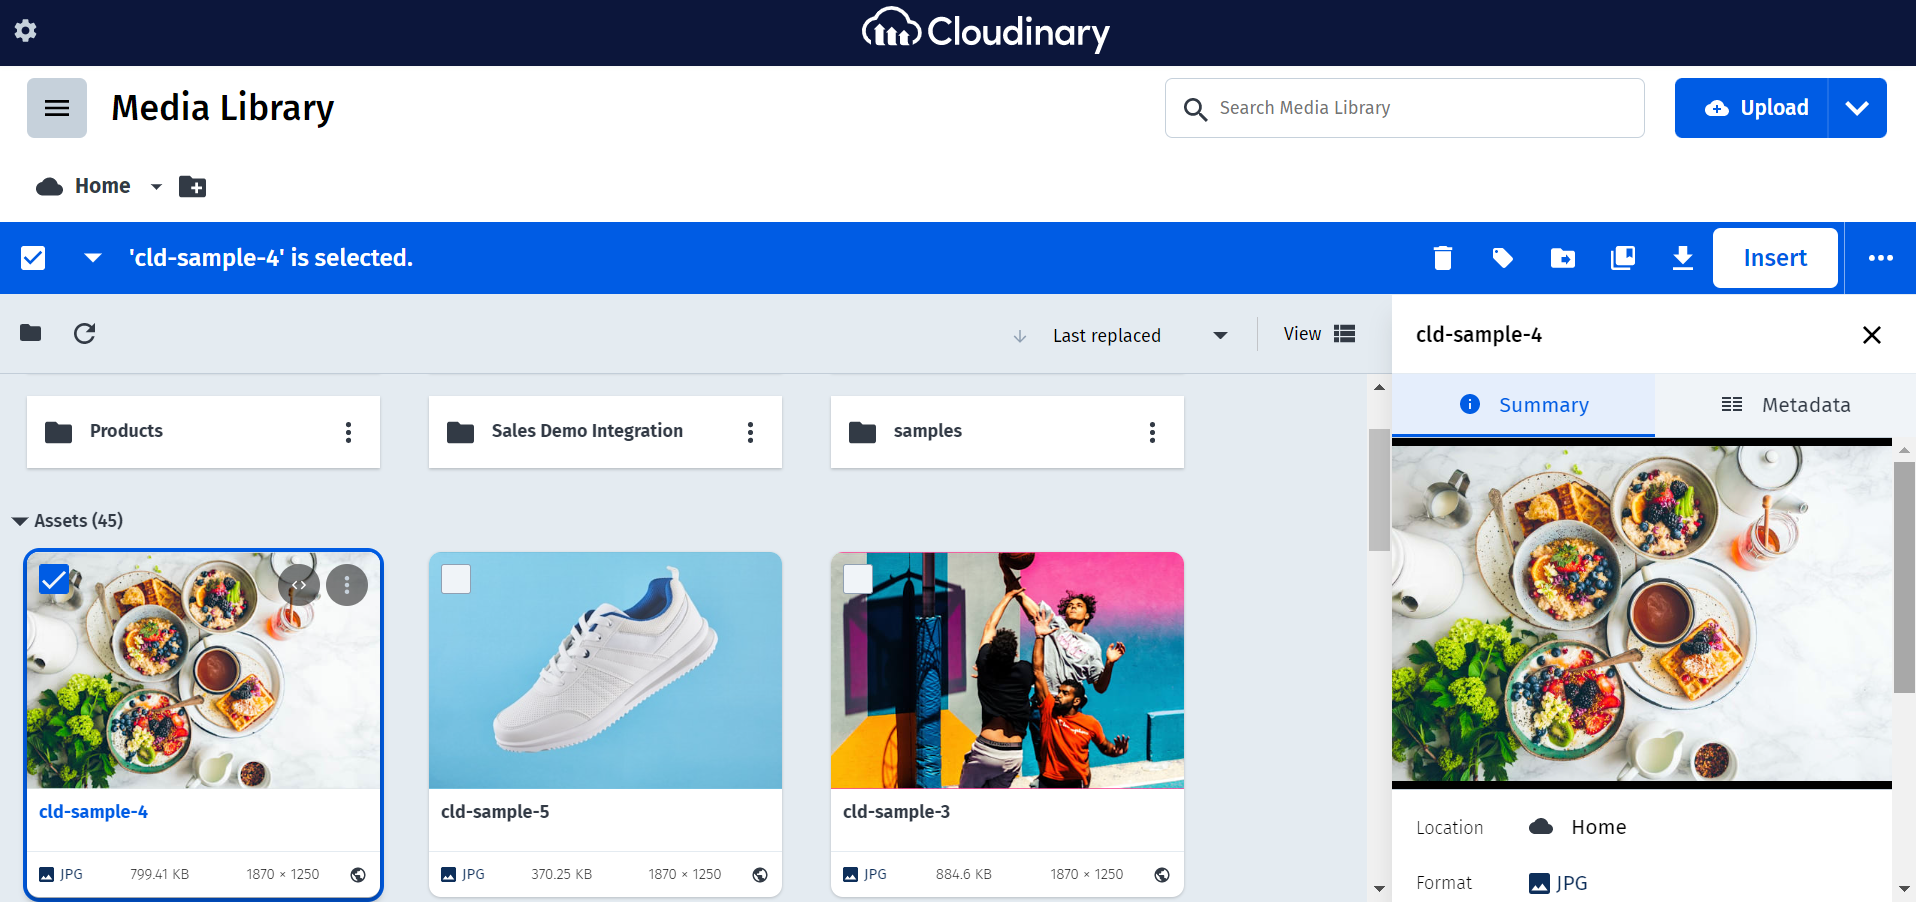 Cloudinary-Media_Library.png